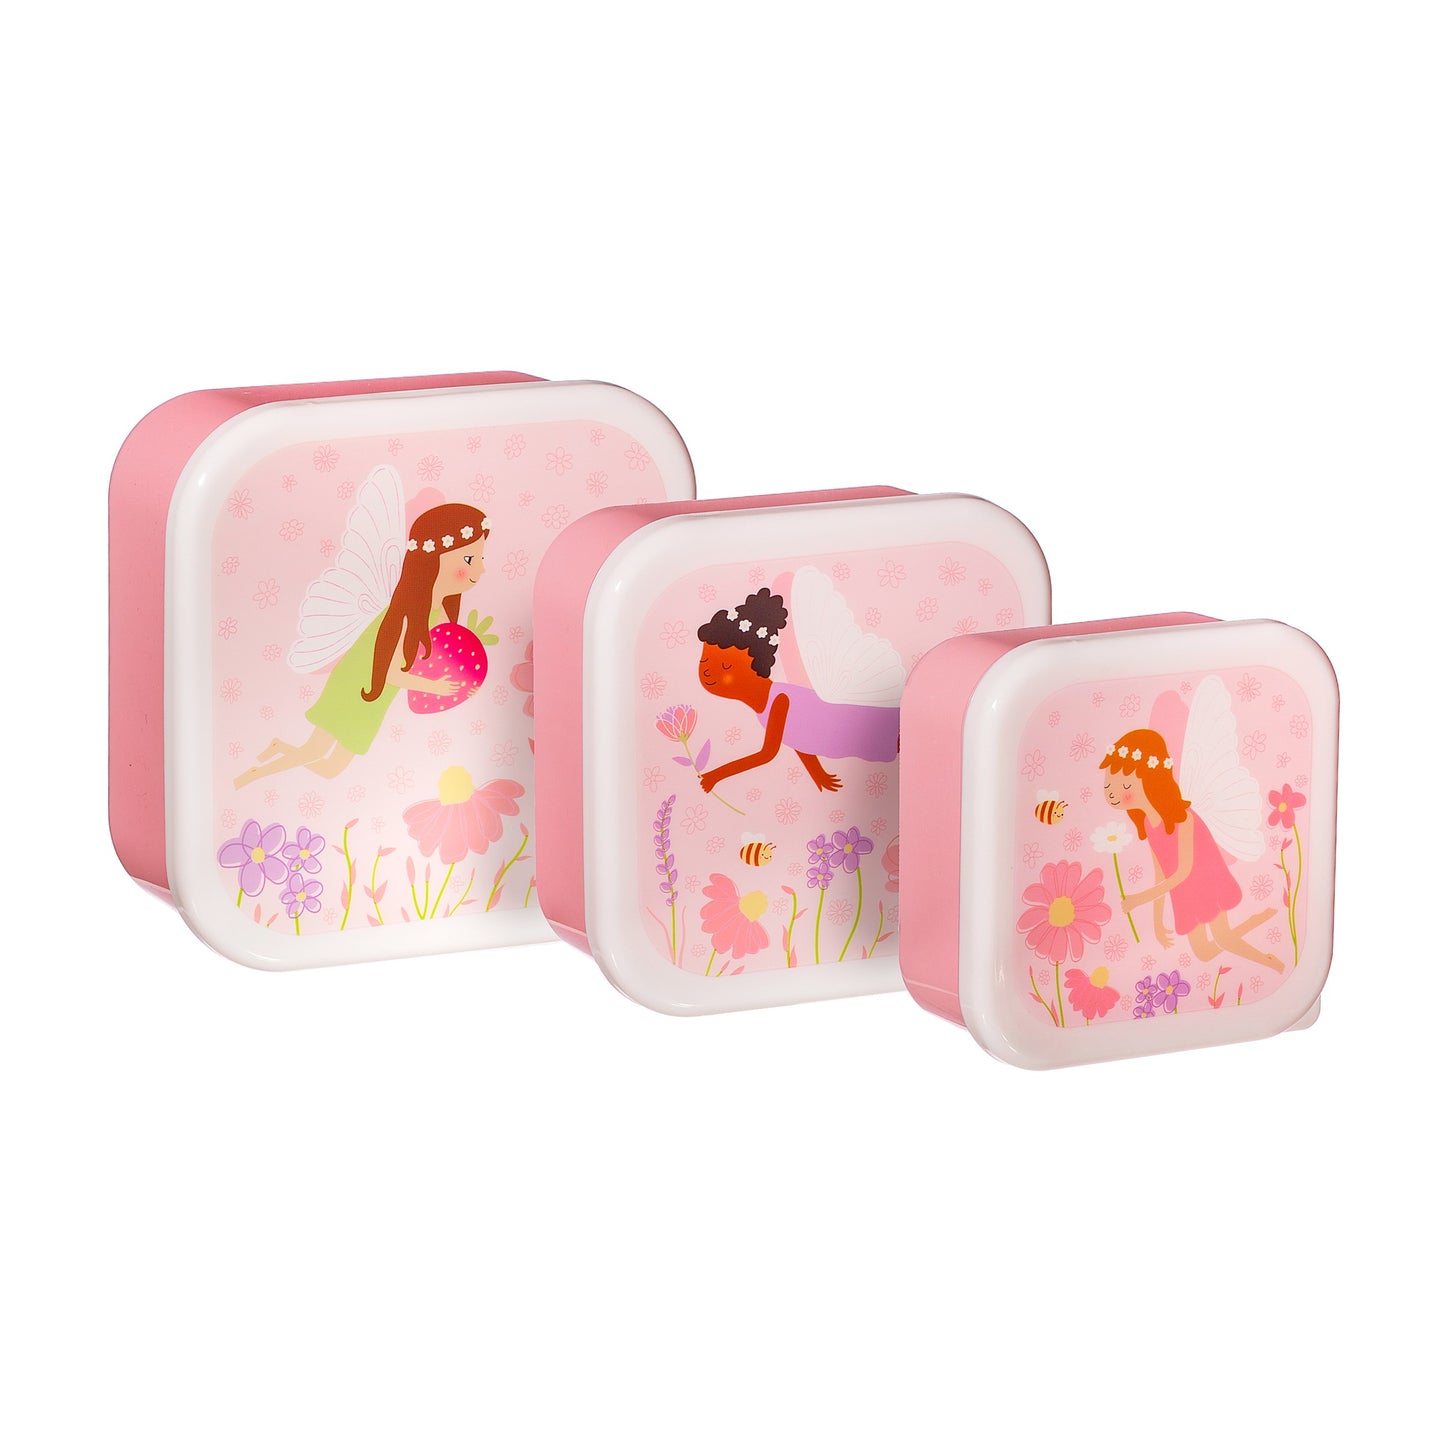 Fairy lunch boxes - set of 3